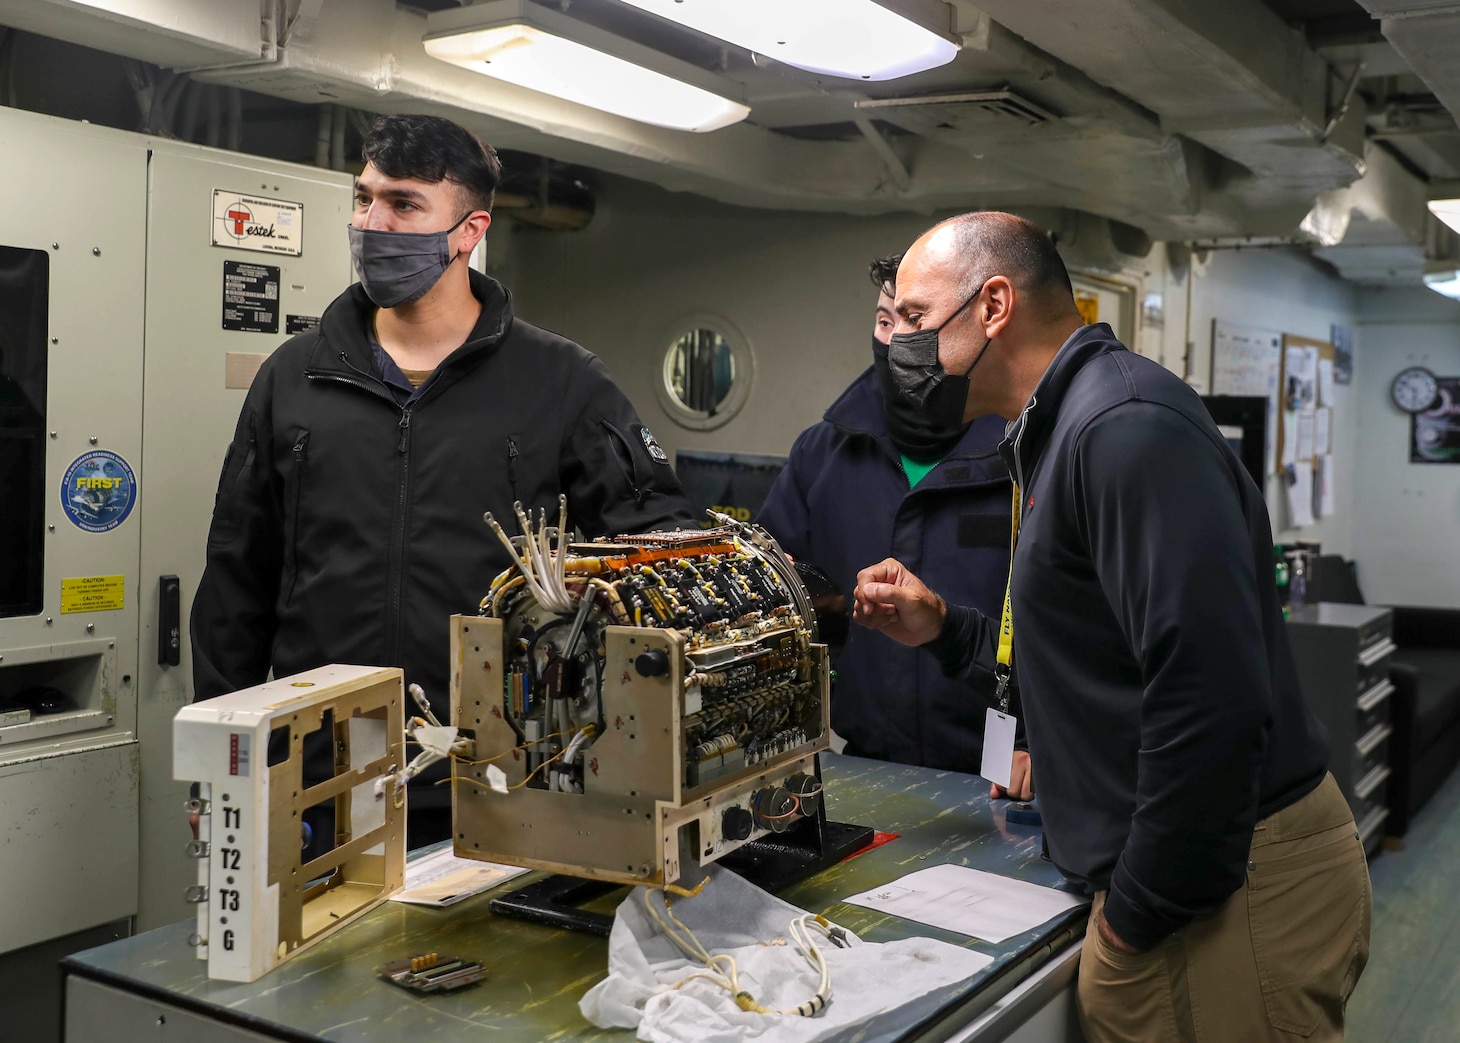 Rep. Jimmy Panetta (right), from California’s 20th Congressional District, views an F/A-18 Super Hornet generator control unit aboard the aircraft carrier USS Abraham Lincoln (CVN 72).